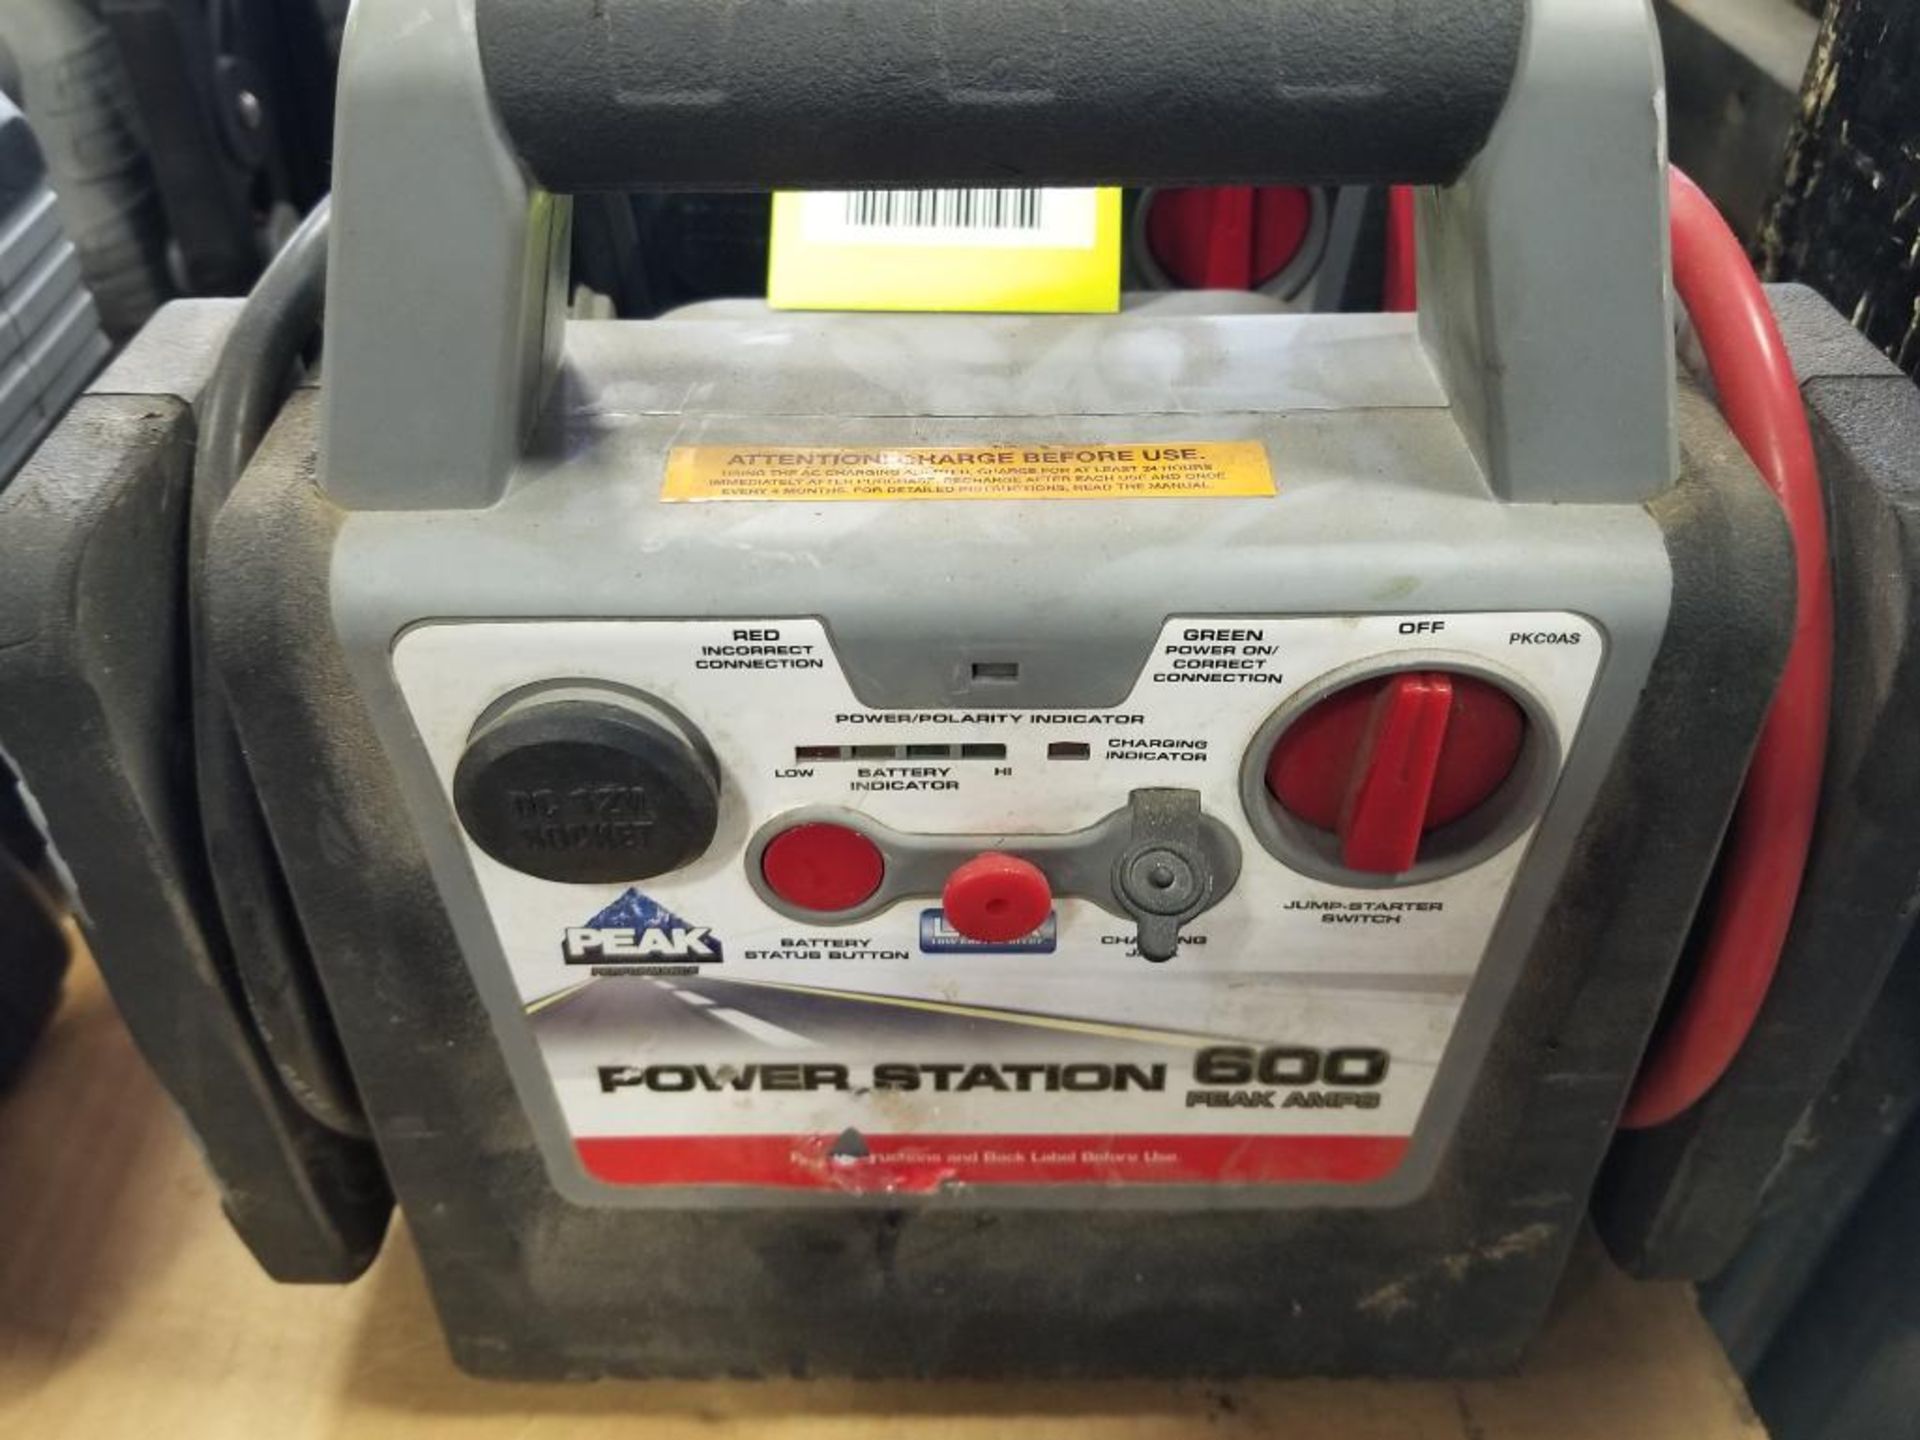 Qty 3 - Assorted Peak Performance Power station jump-starter / inflator. - Image 2 of 6